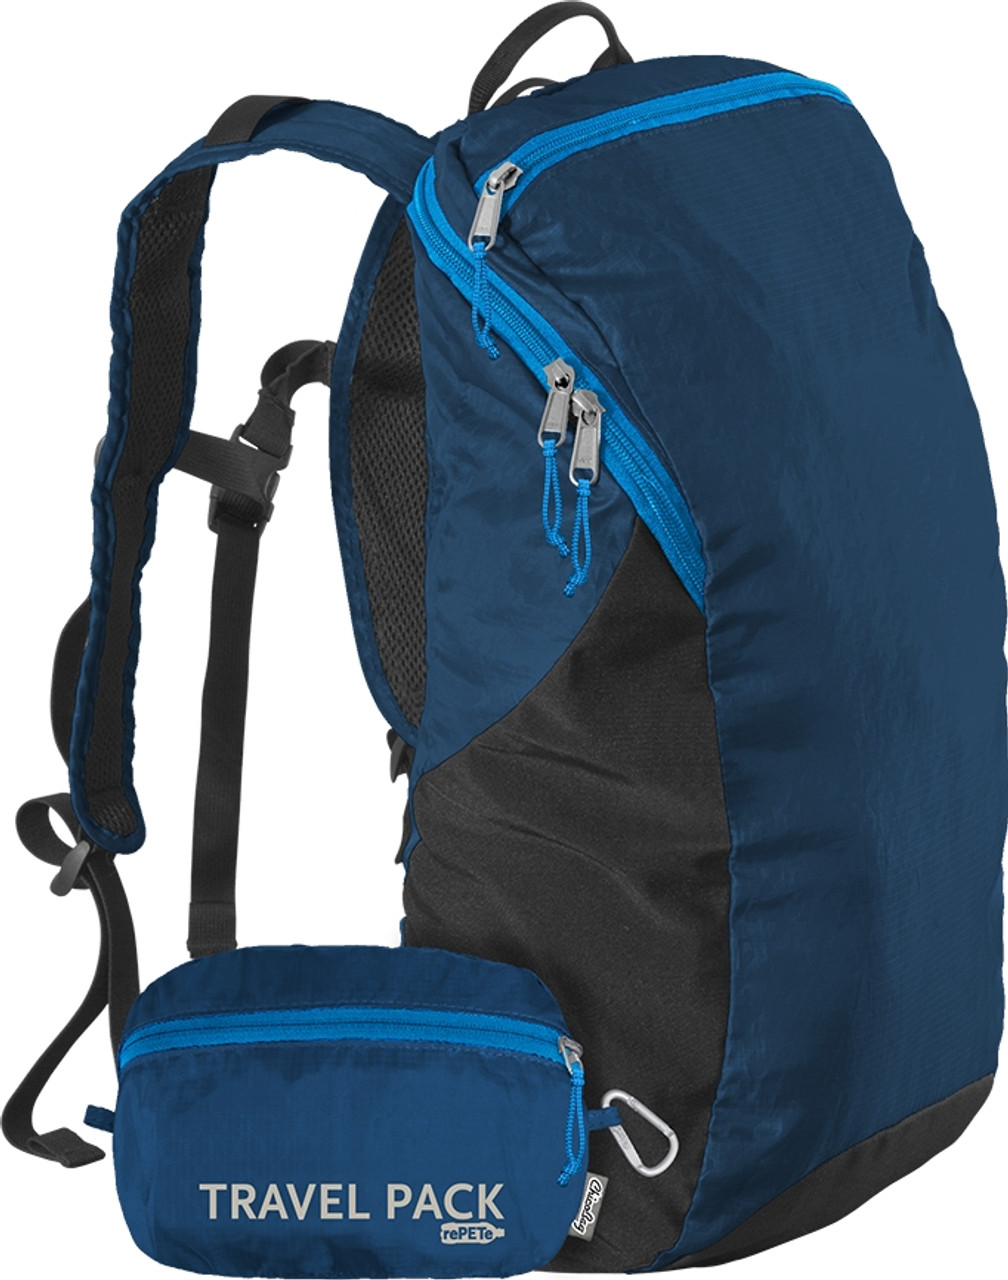 ChicoBag Travel Pack rePETe Pouchable Backpack